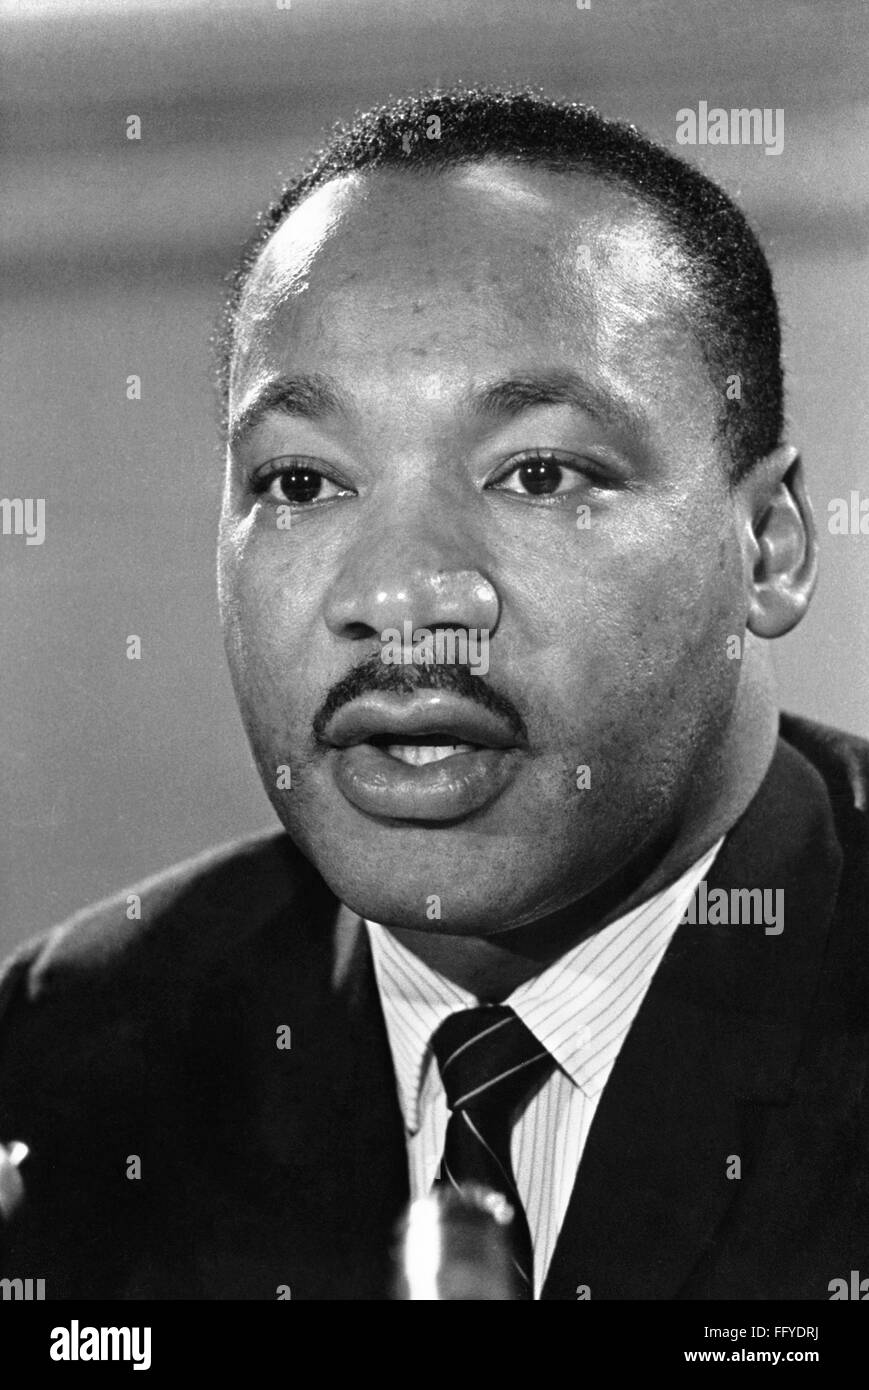 MARTIN LUTHER KING, JR. /n(1929-1968). American cleric and reformer. Undated photograph. Stock Photo